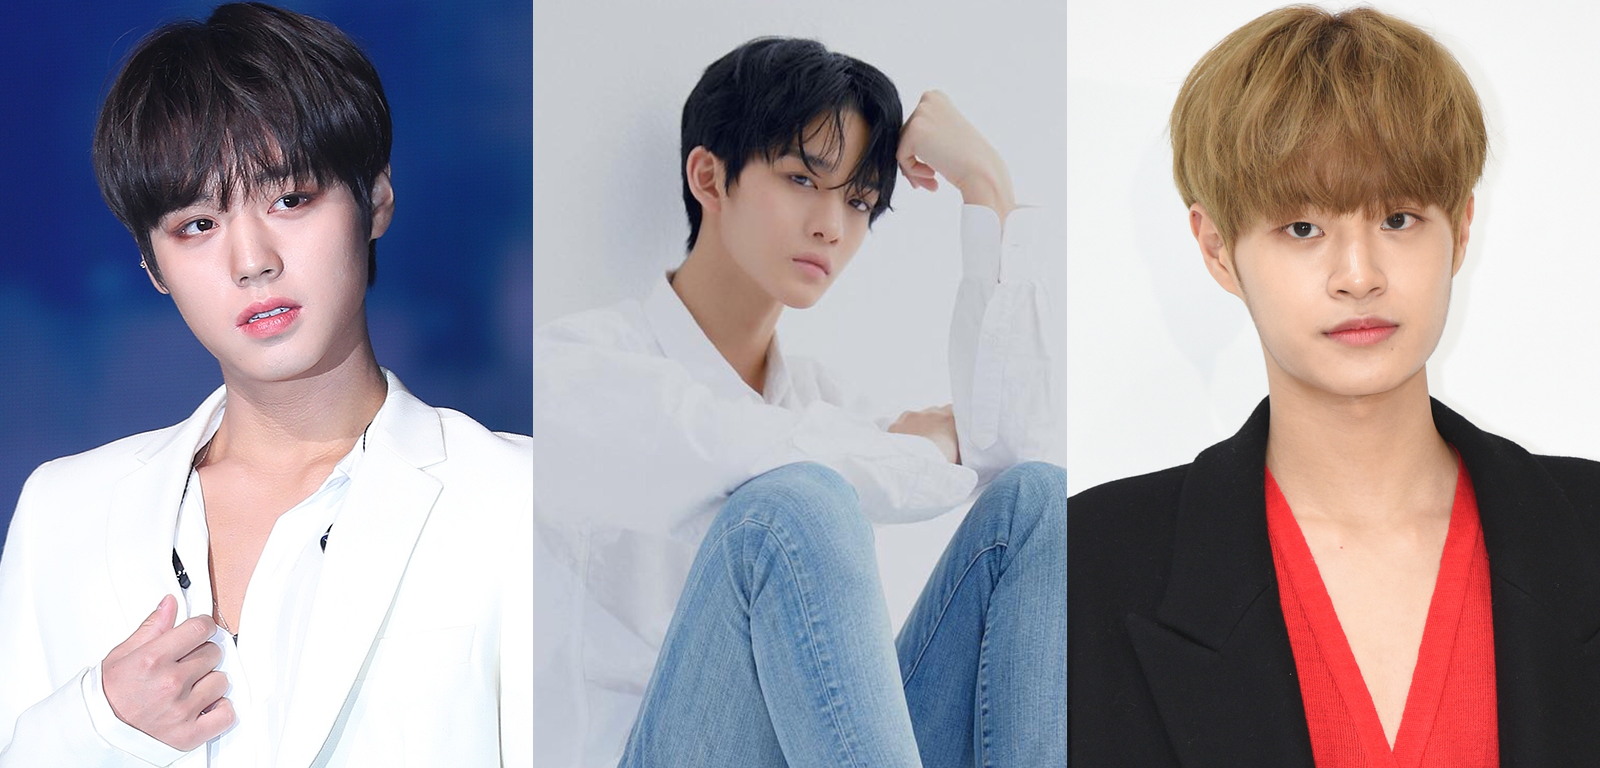 Wanna One: Park Jihoon and Lee Dae Hwi visited Bae Jin Young during his fanmeeting